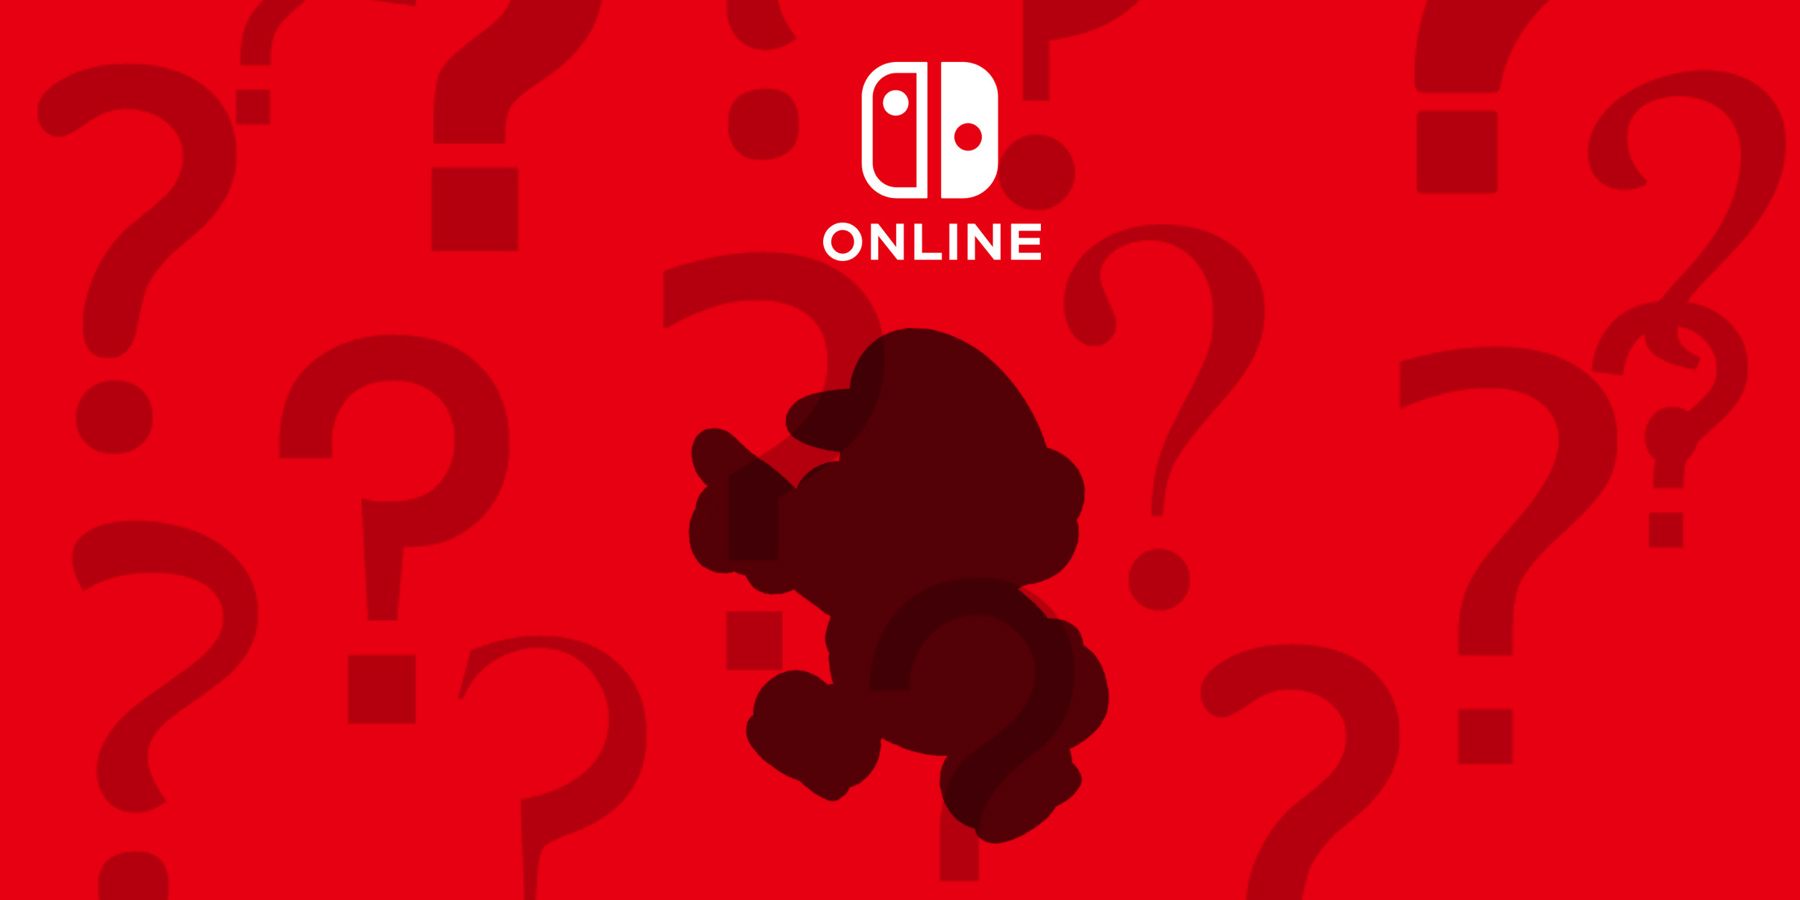 nintendo switch online one obvious inclusion paper mario gamecube